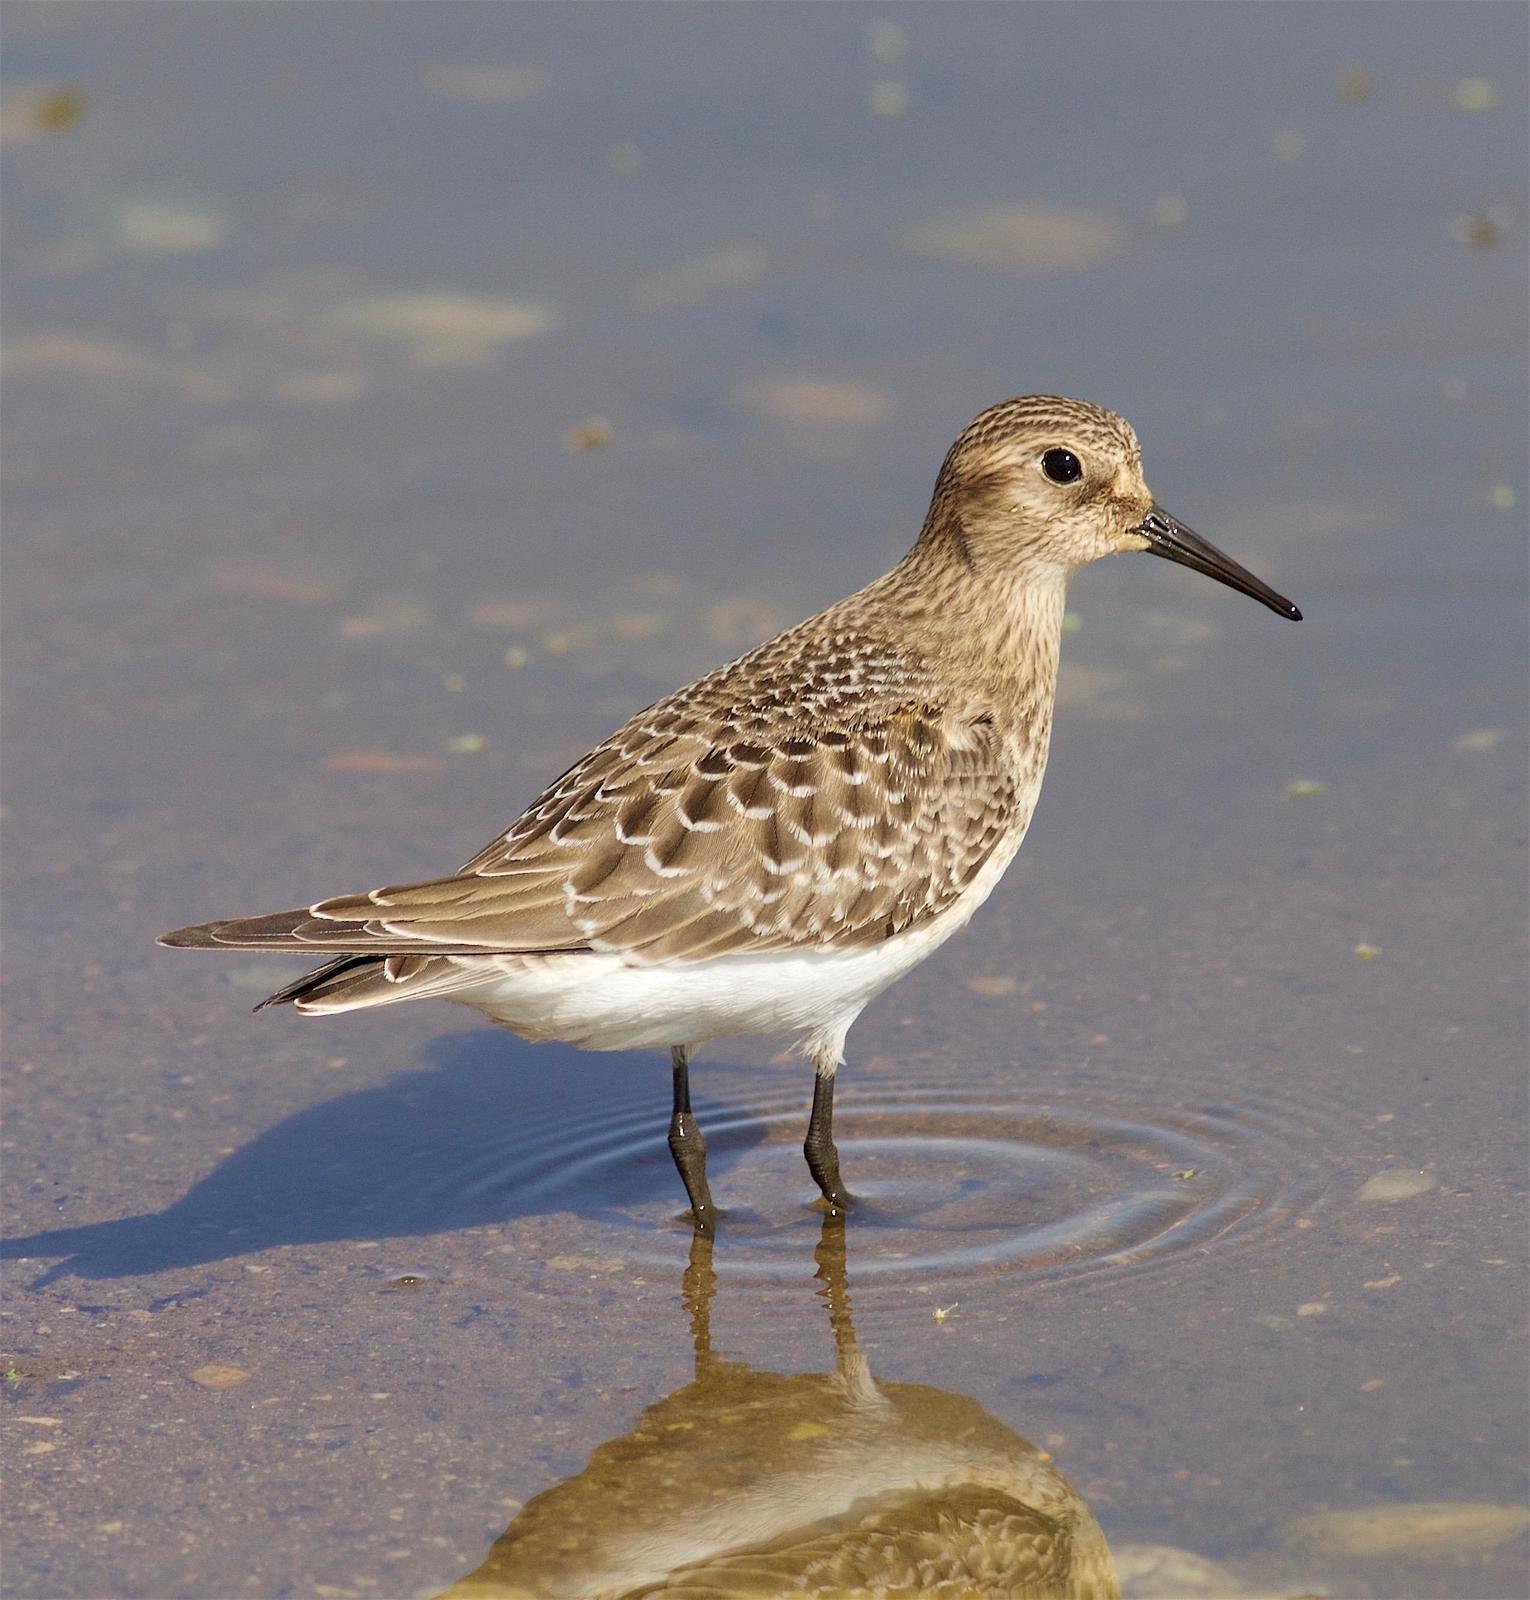 Baird's Sandpiper Photo by Kathryn Keith